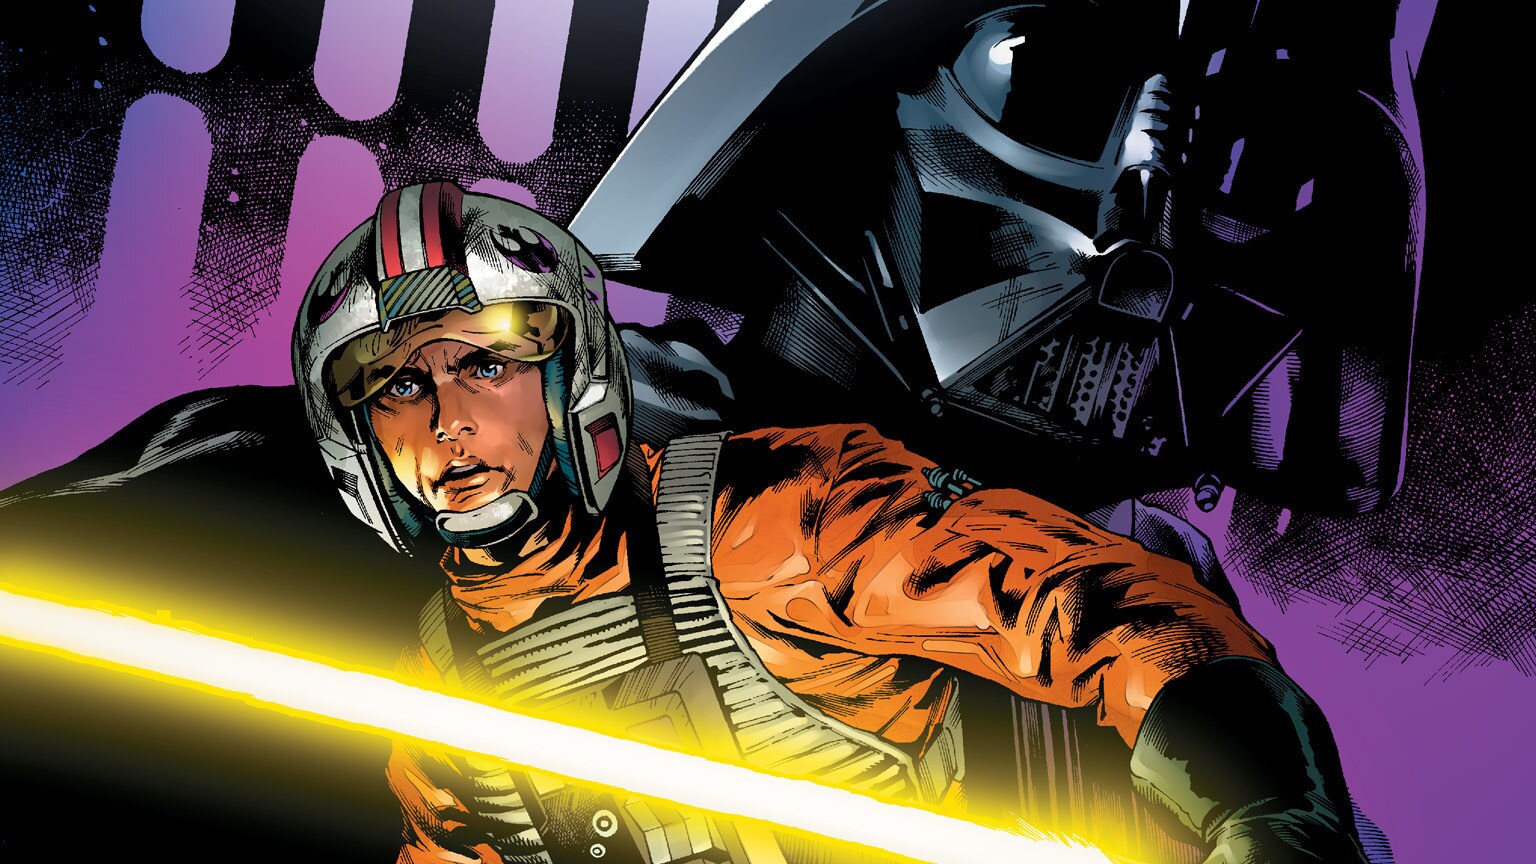 The War of the Bounty Hunters Continues in Marvel’s August 2021 Star Wars Comics - Exclusive